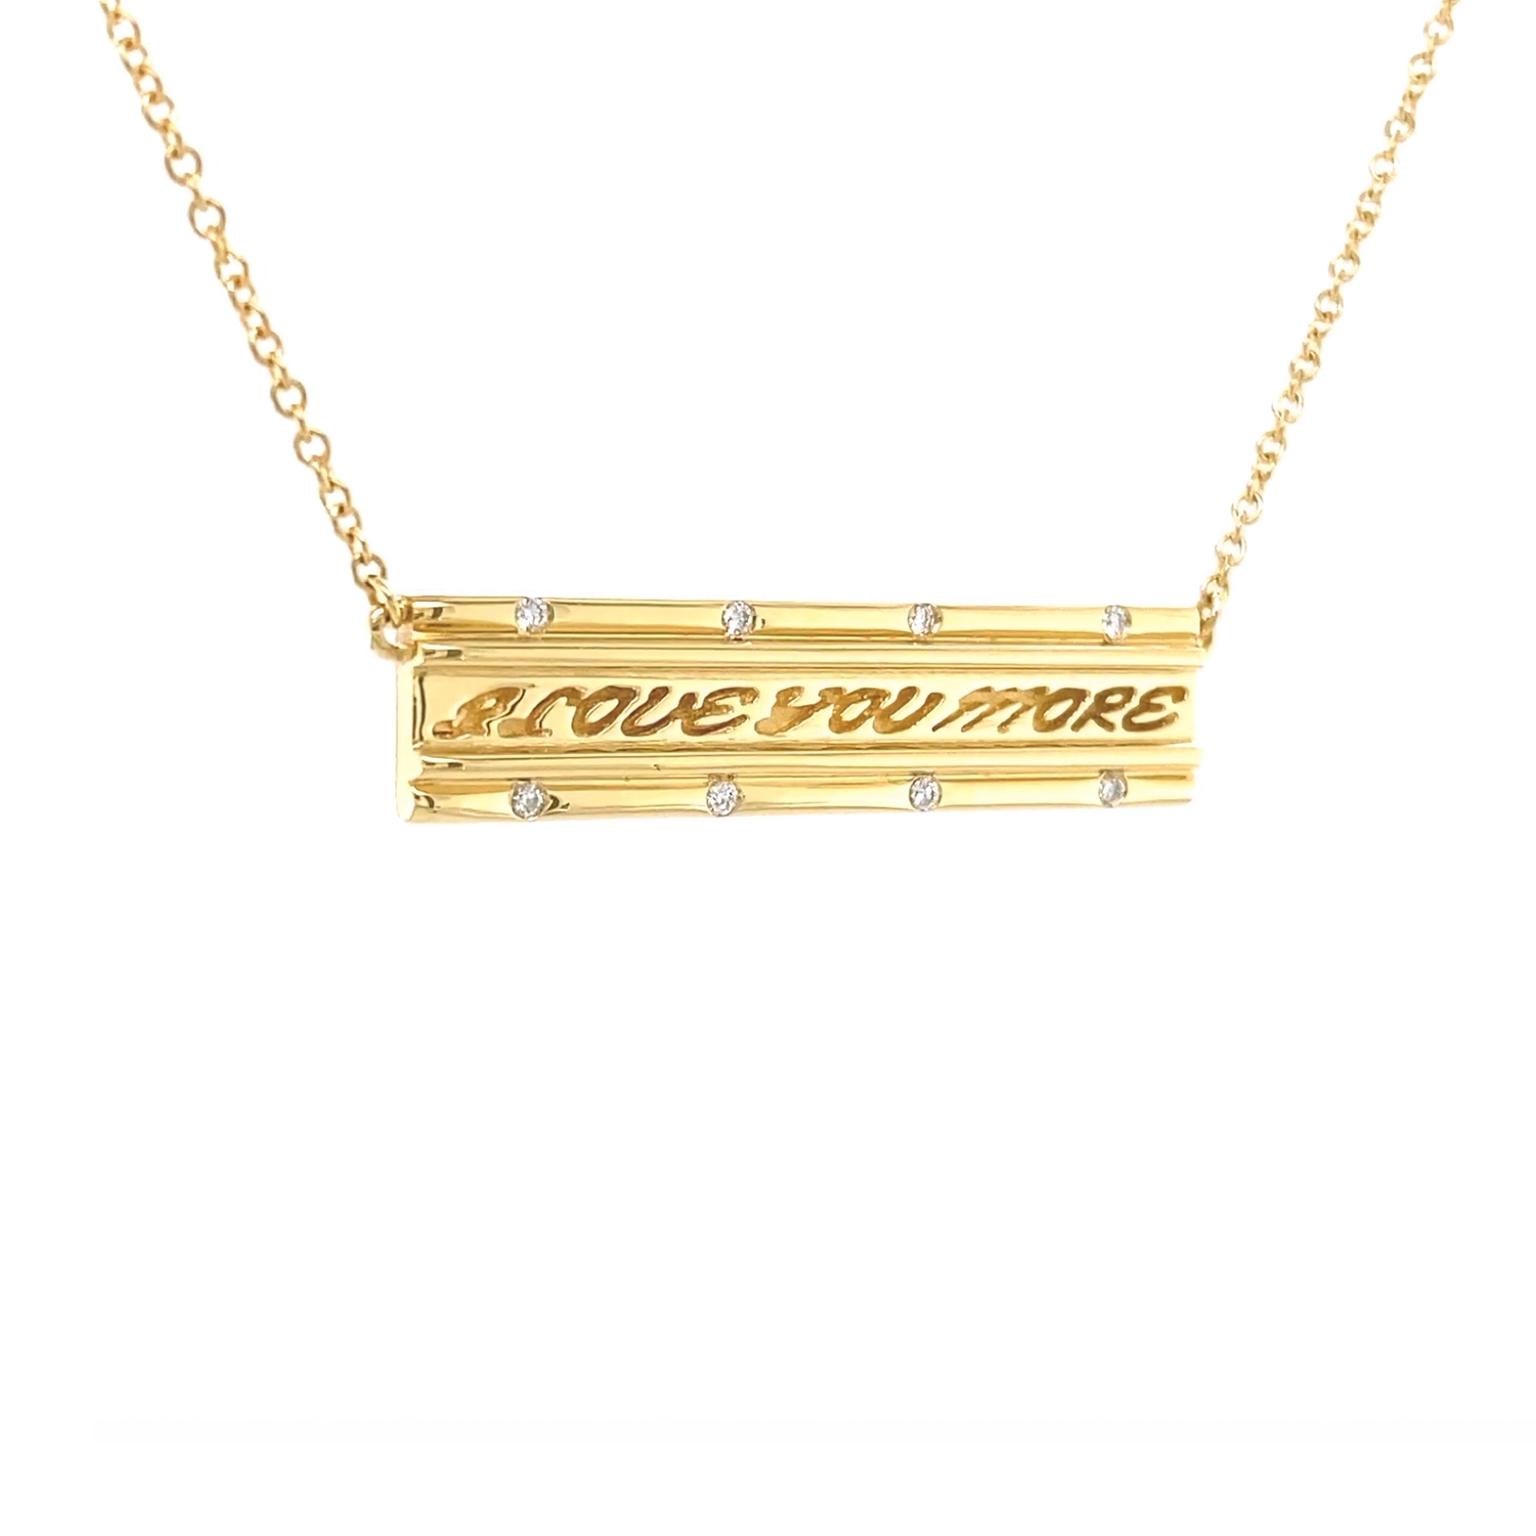 Love and diamonds adorn this pendant. The 18k yellow-gold base is shaped into a bar. In the center are the engraved words 'I love you more.' Smooth wires embedded along the sides frame the message. Flush set round brilliant cut diamonds bring